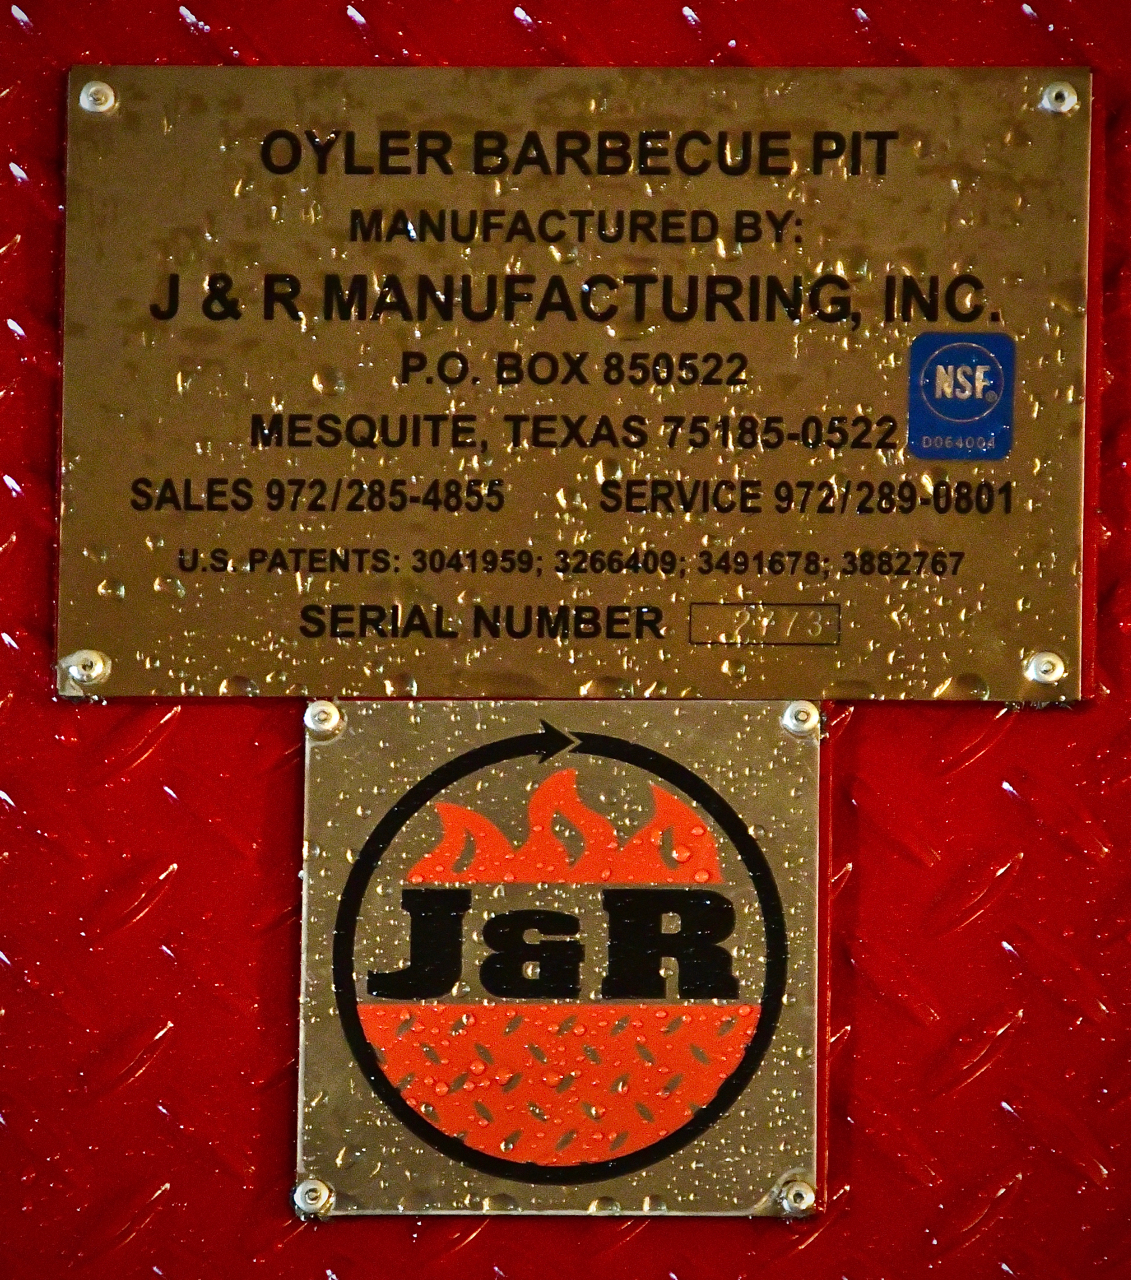 The Oyler 1300 smoker is made in Mesquite Texas